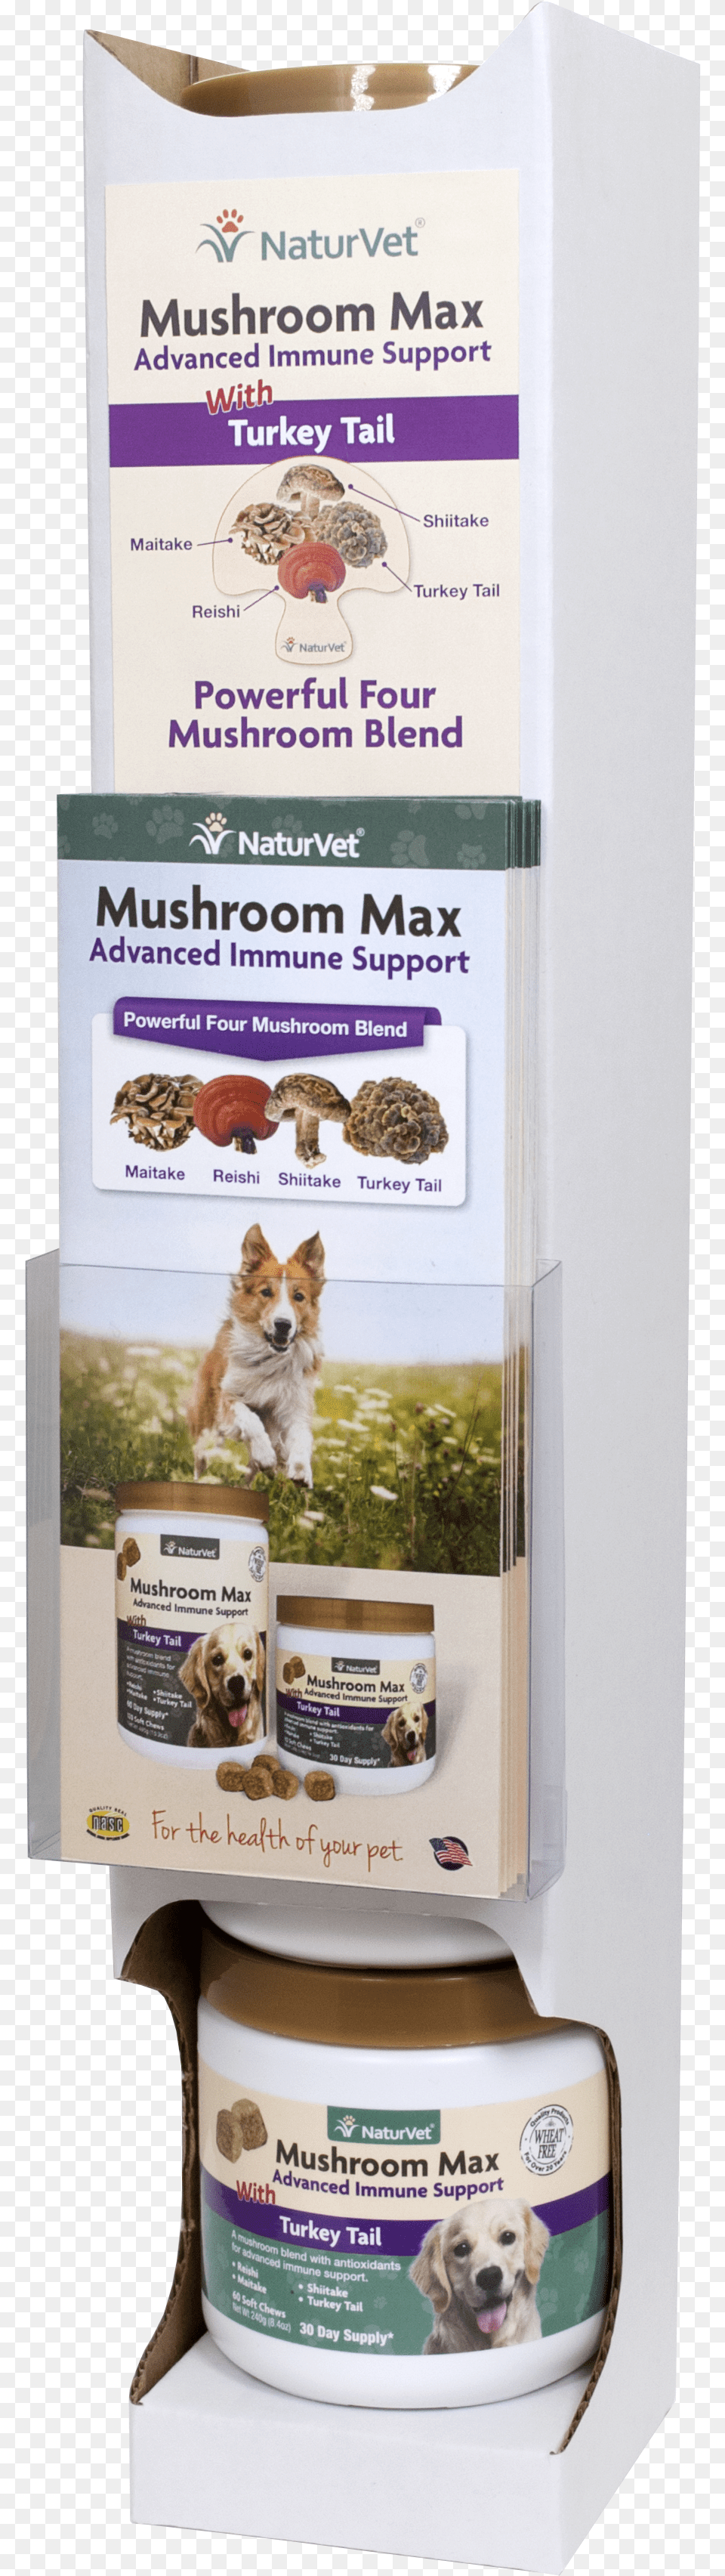 Mushroom Max Advanced Immune Support Drop Down Display Norwegian Lundehund, Advertisement, Poster, Animal, Canine Png